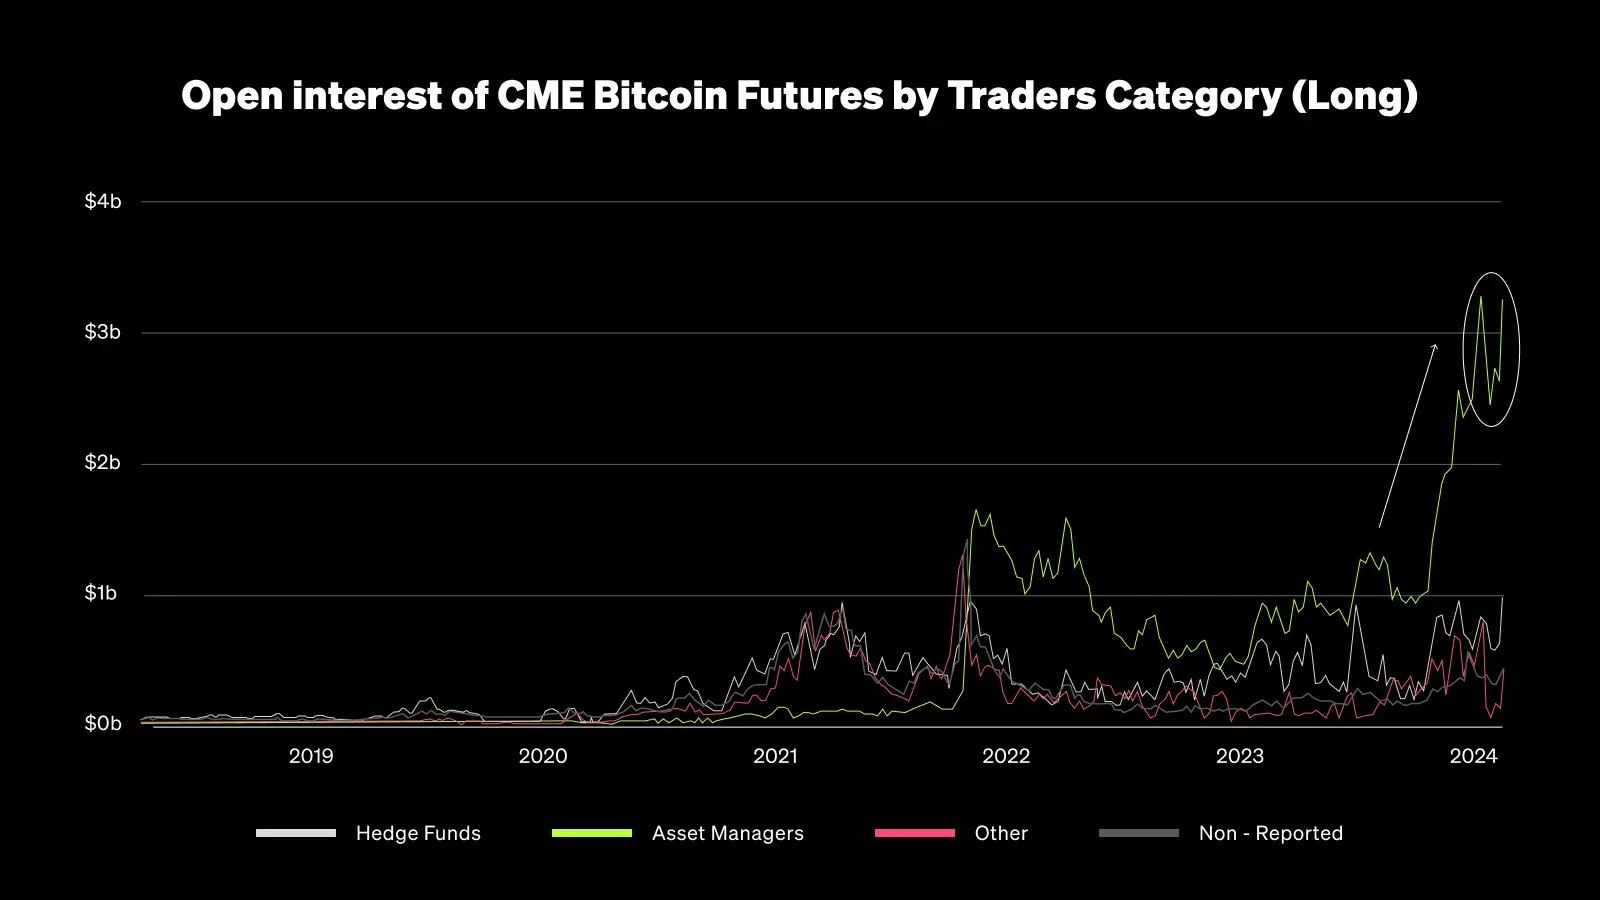 Open-interest of CME Bitcoin Futures by traders category